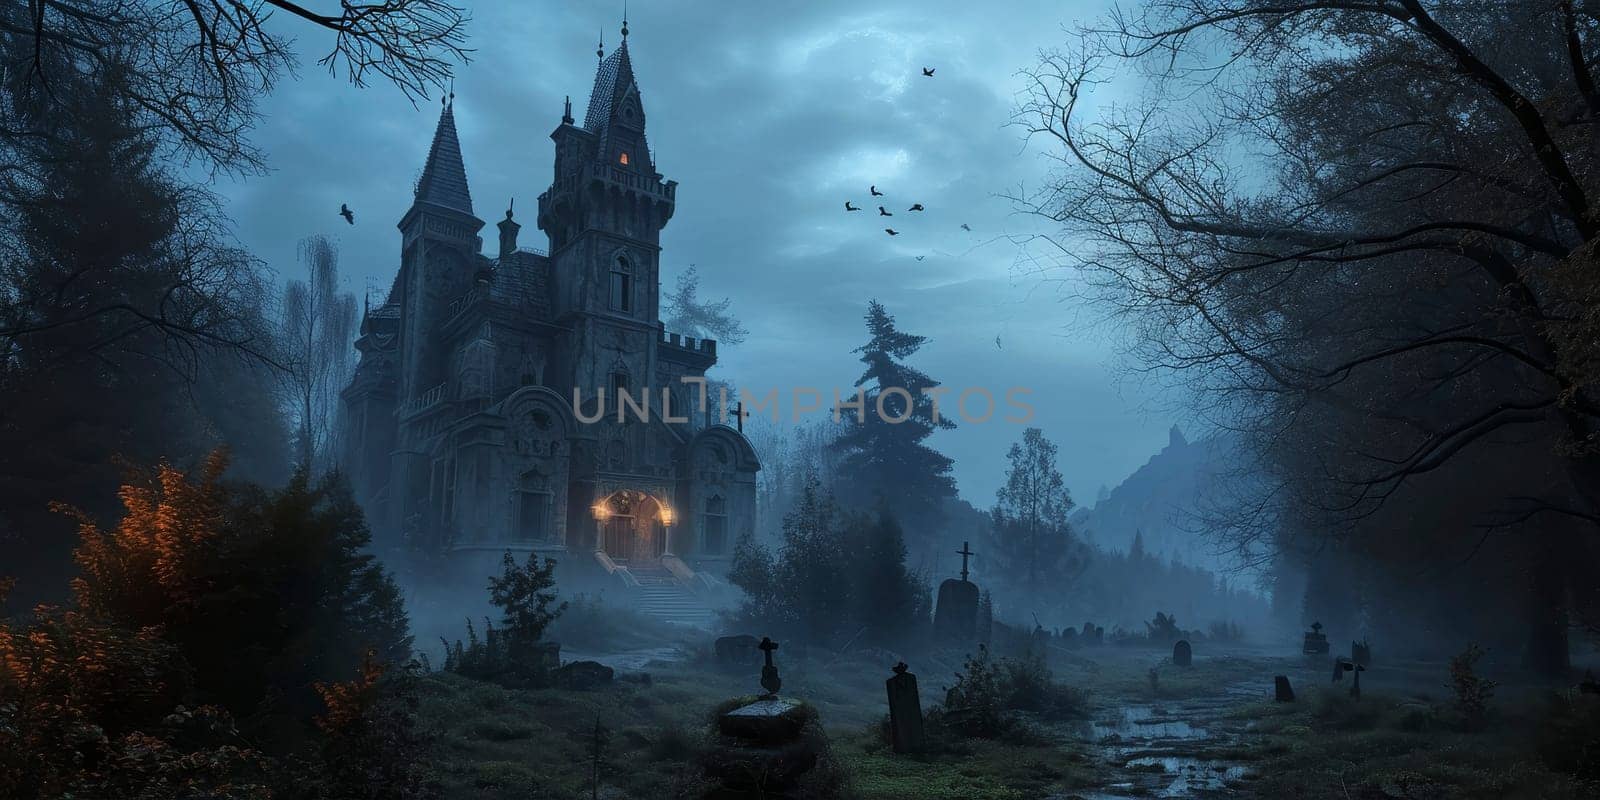 Gothic Castle with Moonlit Cemetery Scene by andreyz